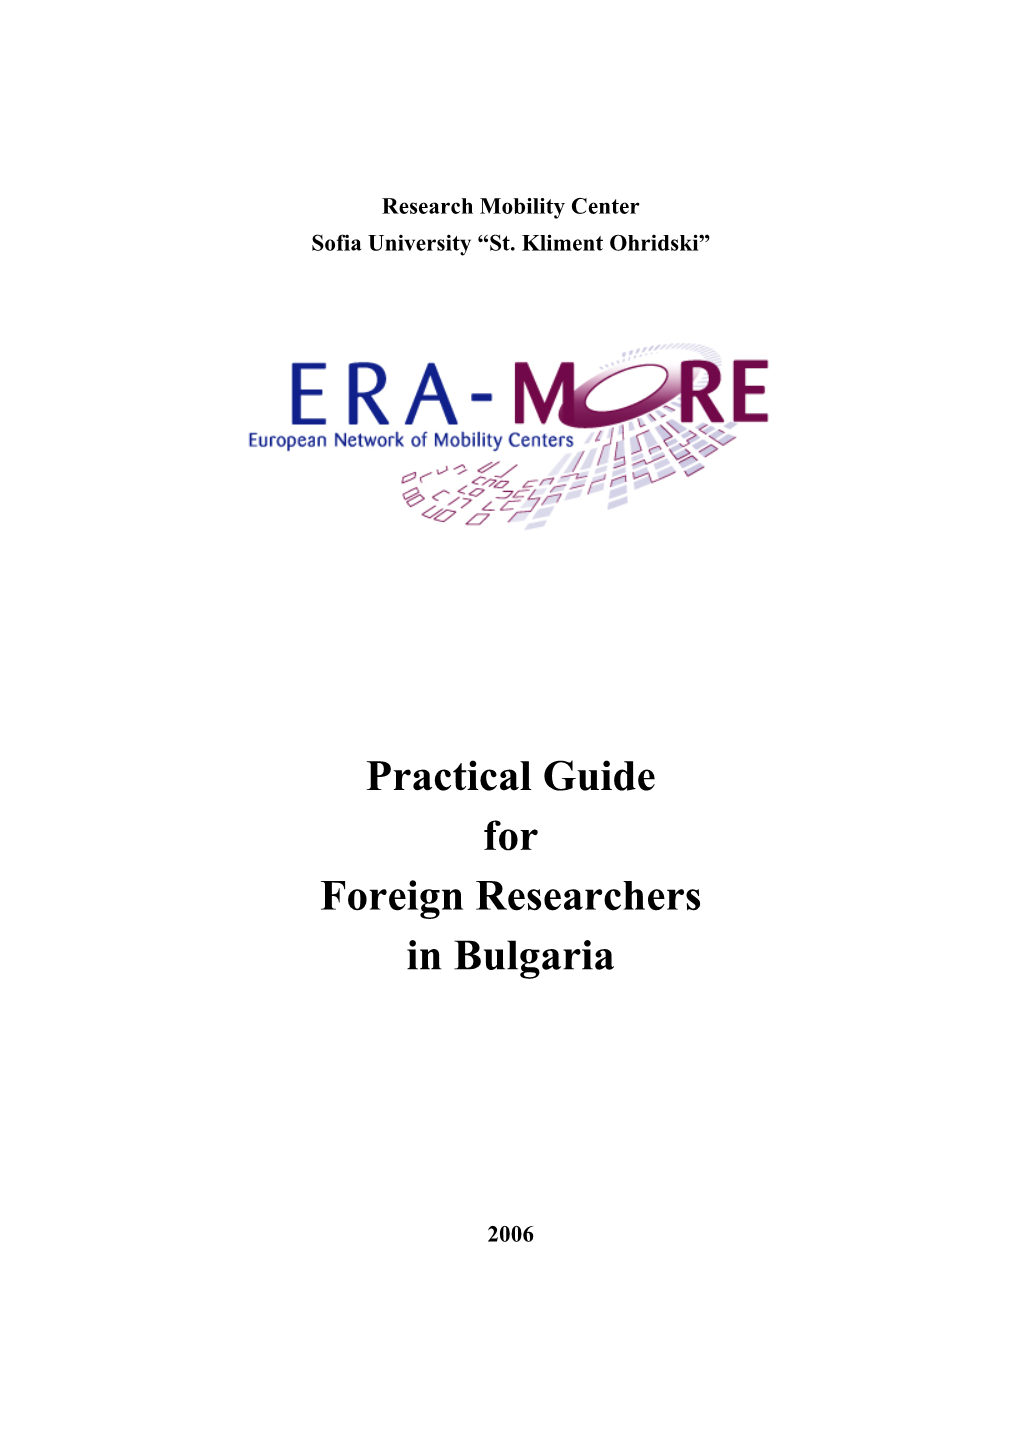 Practical Guide for Foreign Researchers in Bulgaria